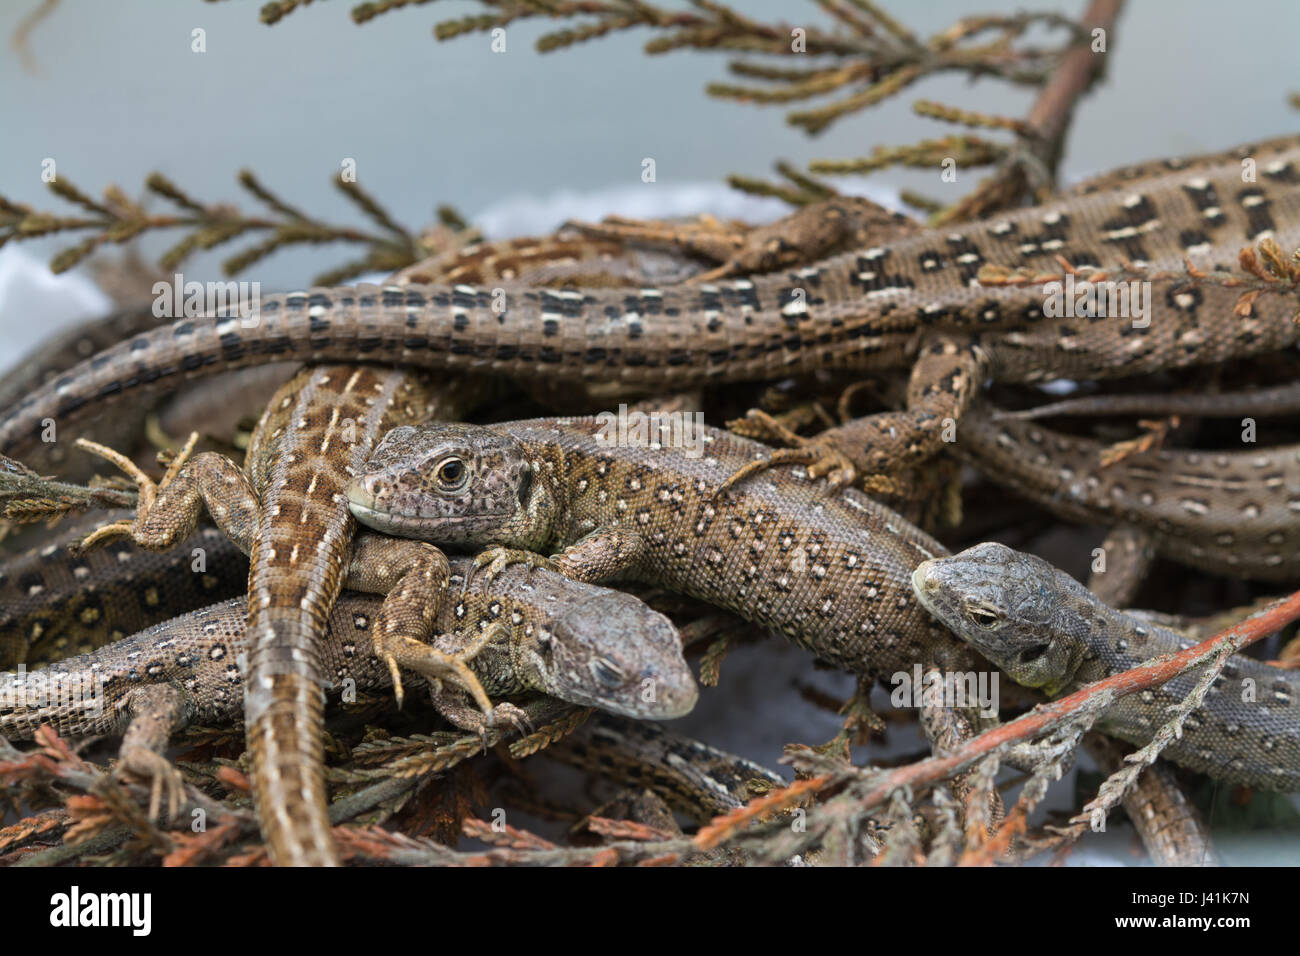 Young captive-bred sand lizards (Lacerta agilis) for re-introduction into a heathland site in Surrey, UK Stock Photo